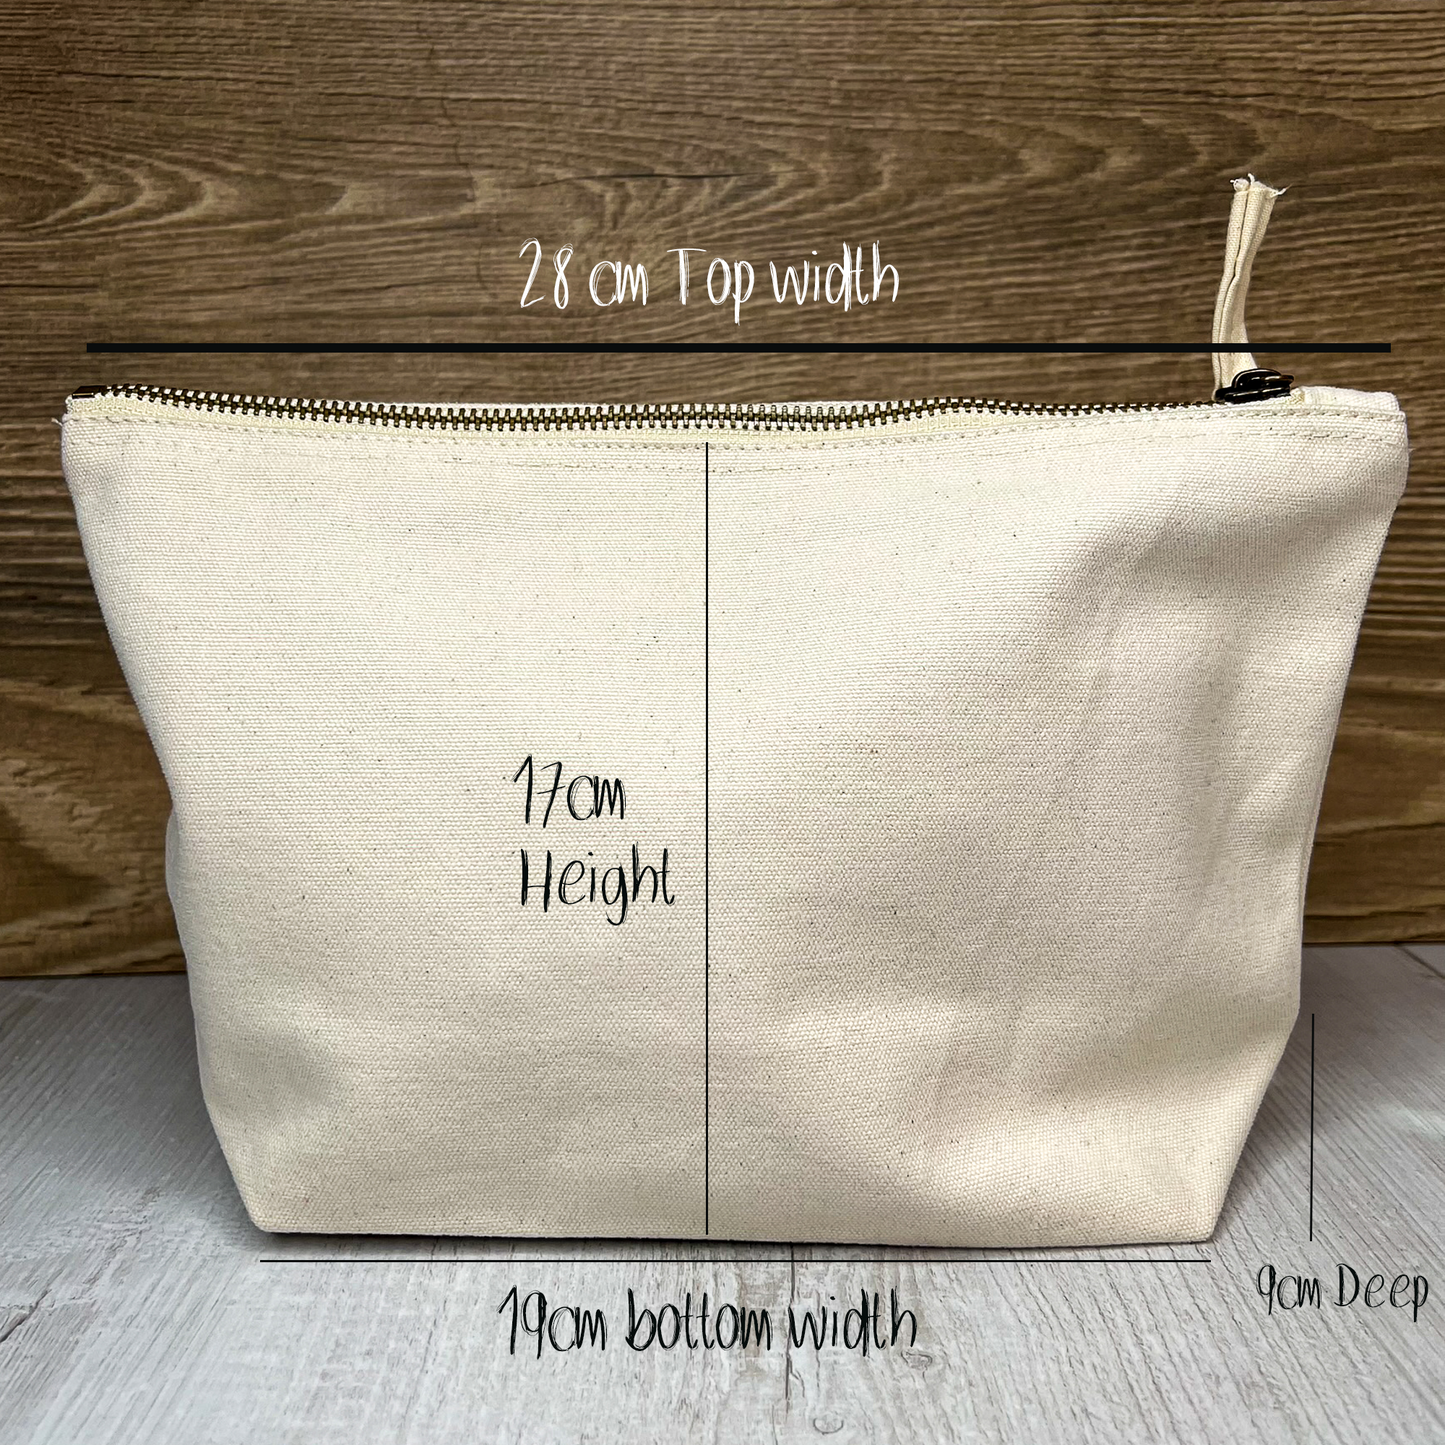 Embroidery soul project zip bag